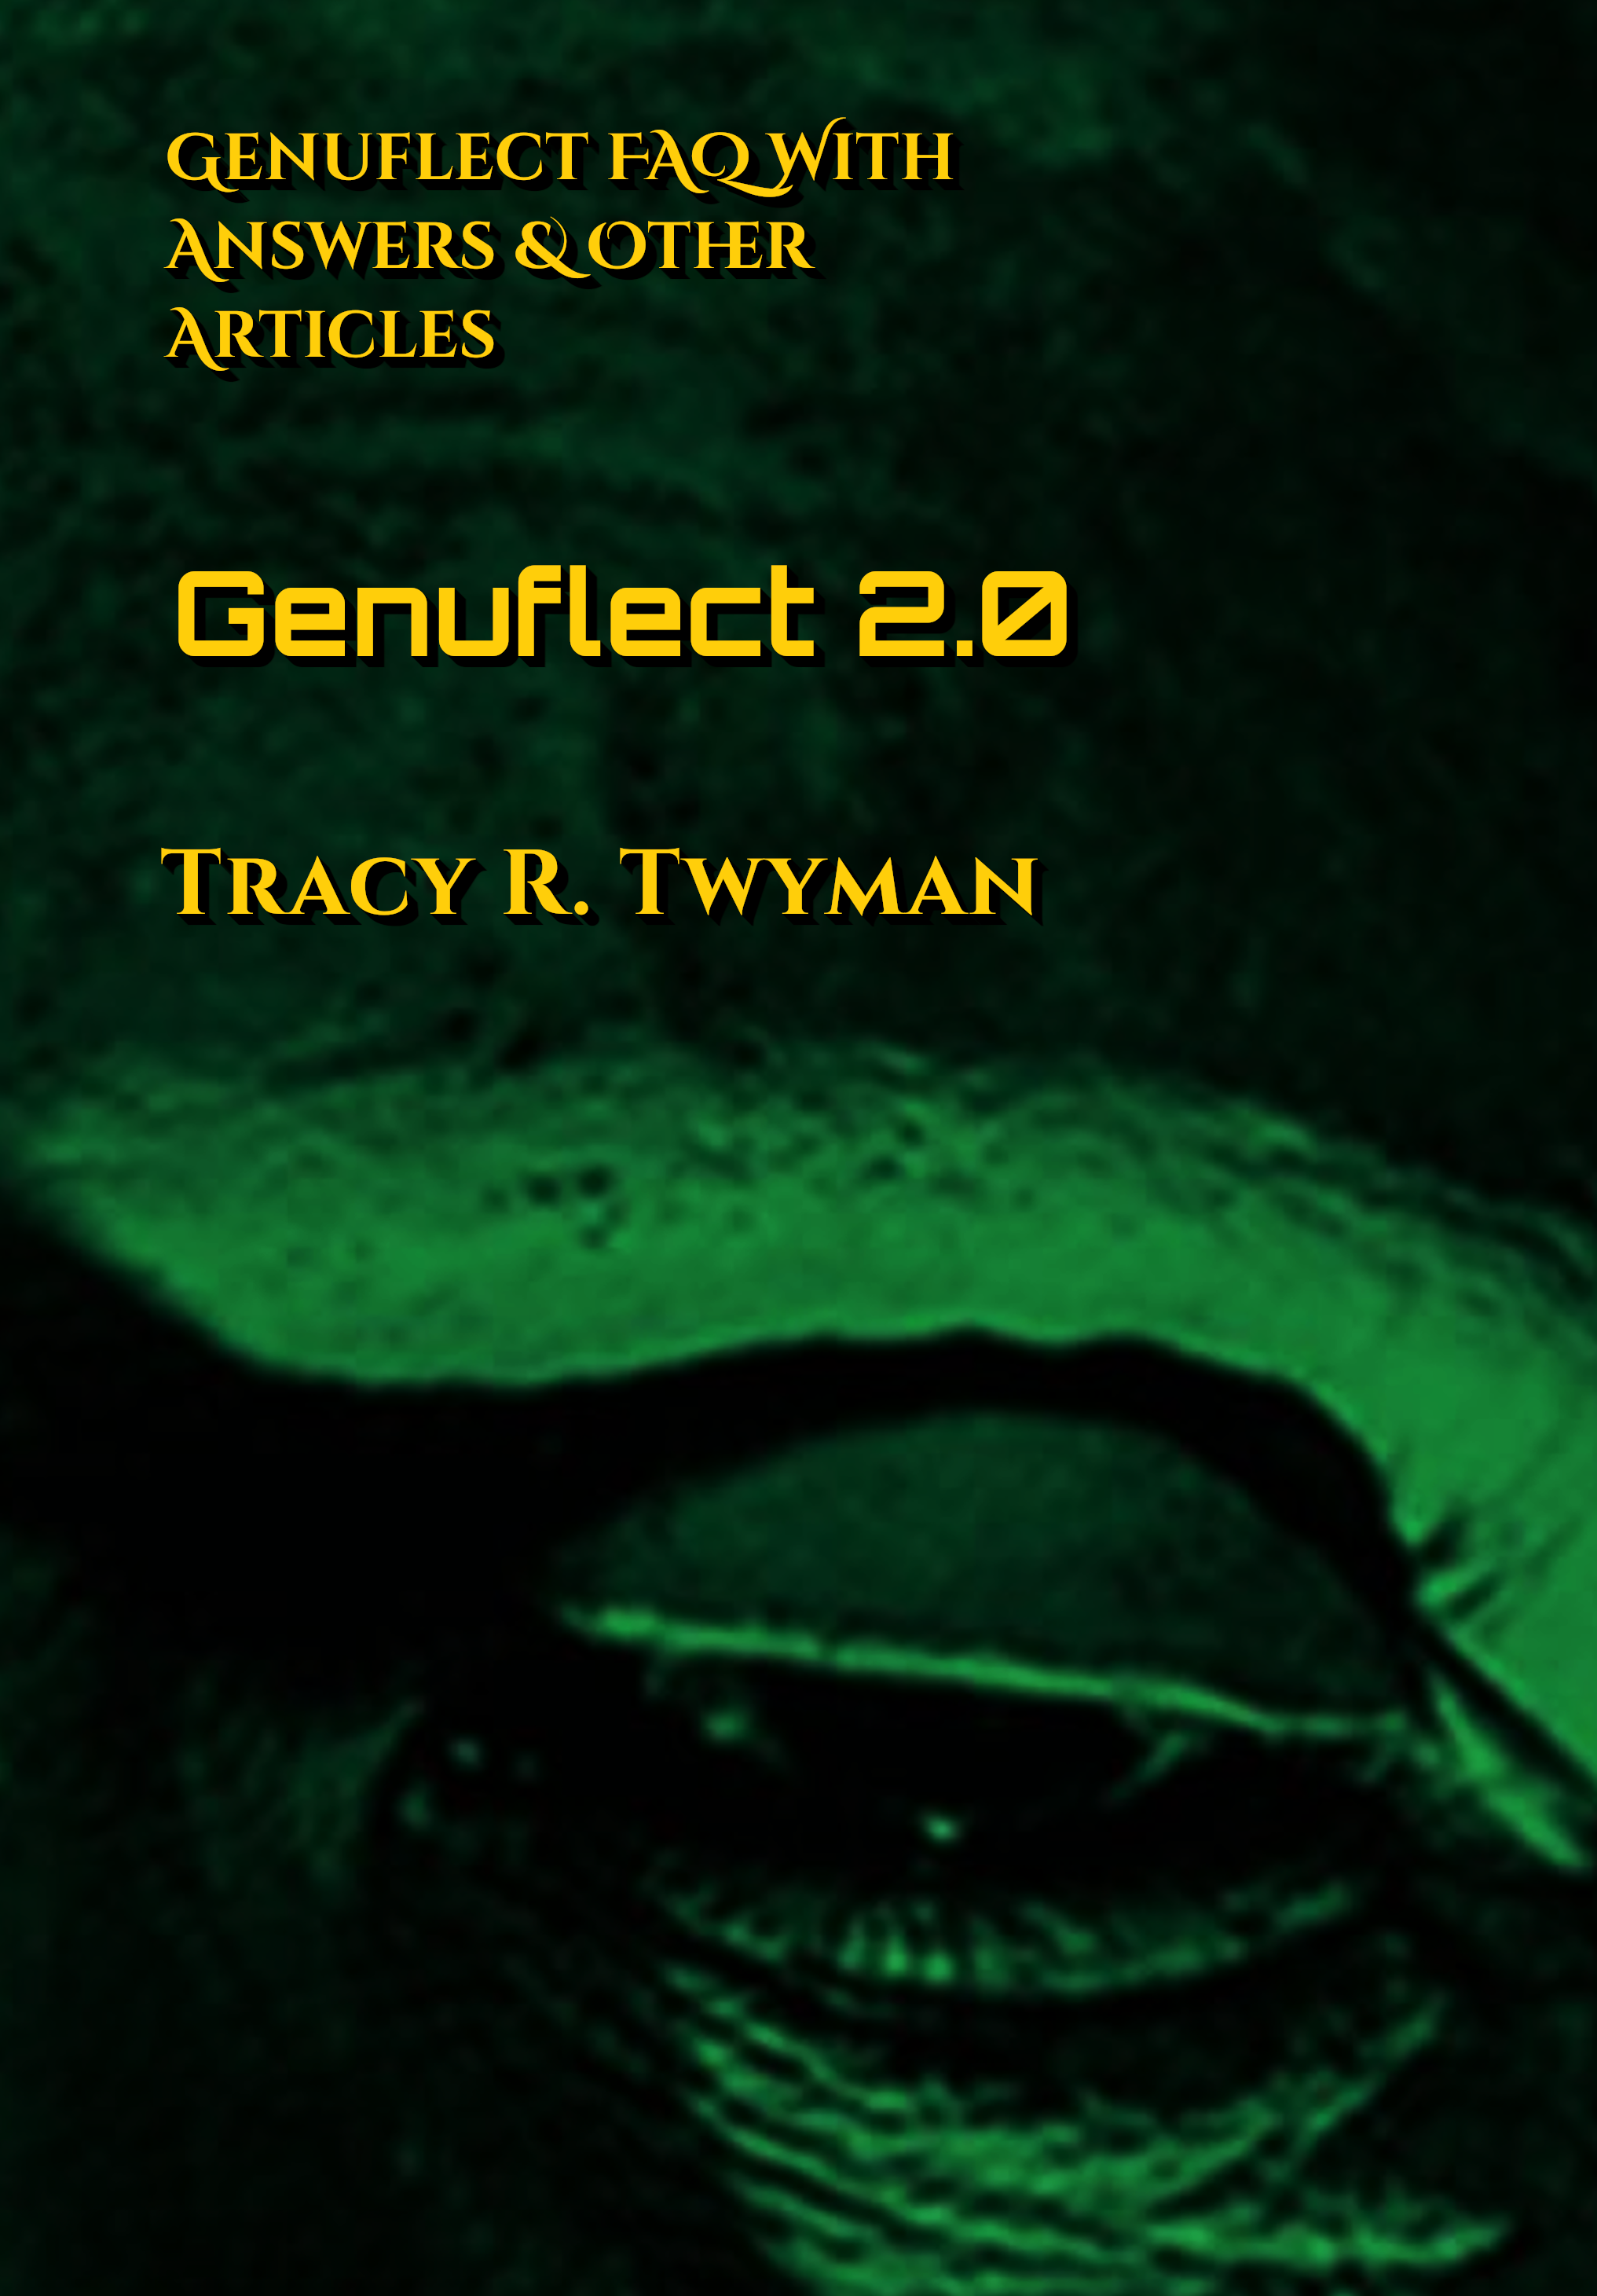 Book Cover Front: Genuflect 2.0: Genuflect FAQ With Answers